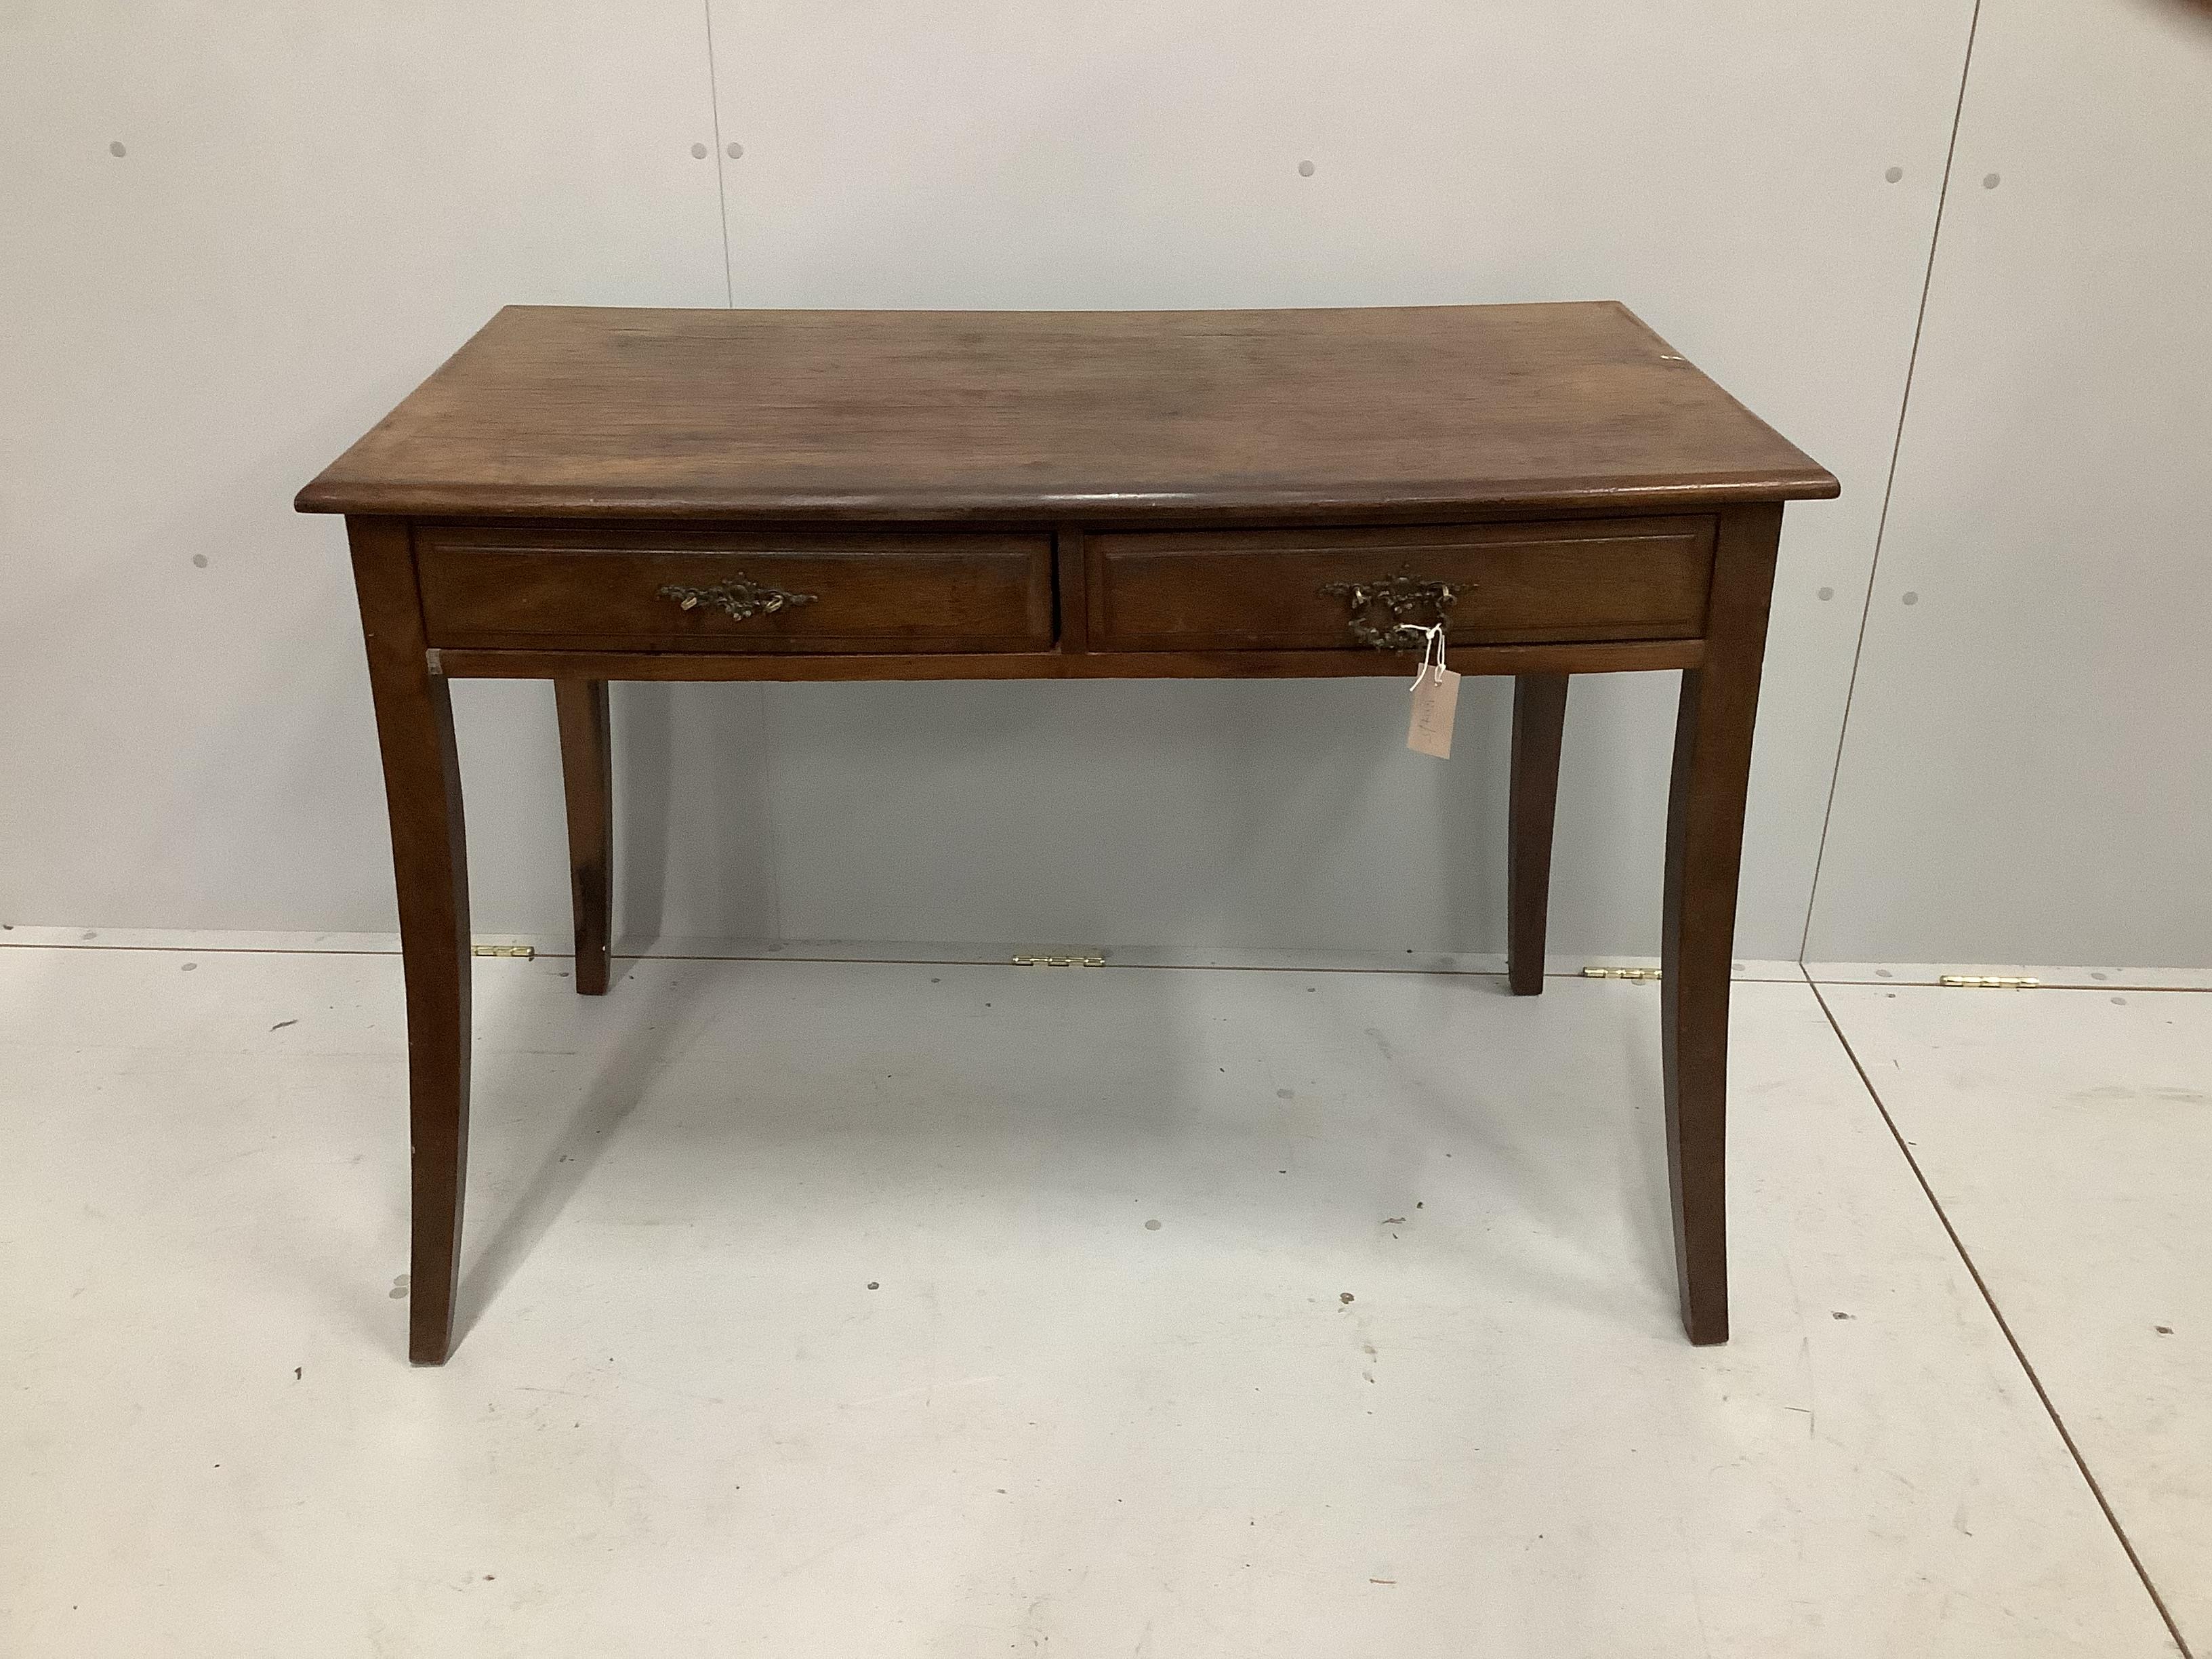 An early 20th century mahogany two drawer table, width 110cm, depth 59cm, height 78cm